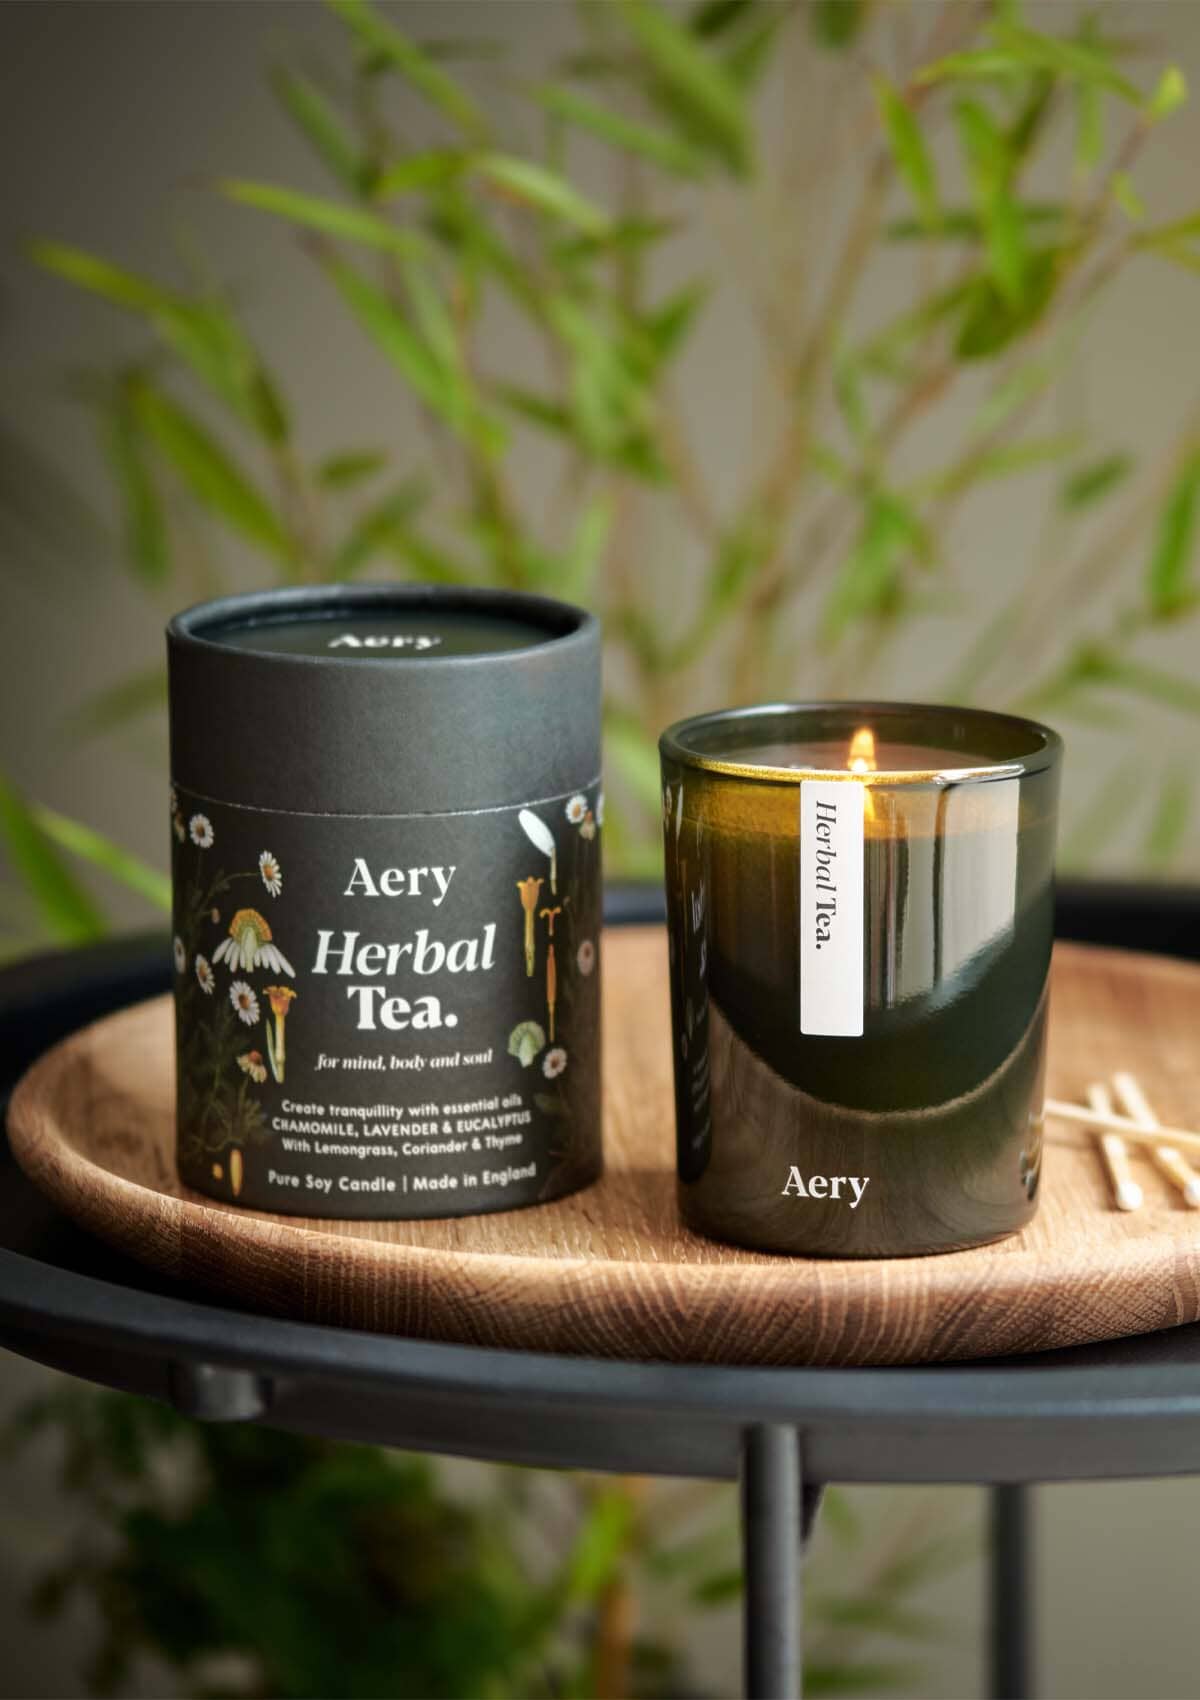 Green Herbal Tea candle displayed next to product packaging by Aery placed on wooden tray with green plant behind 